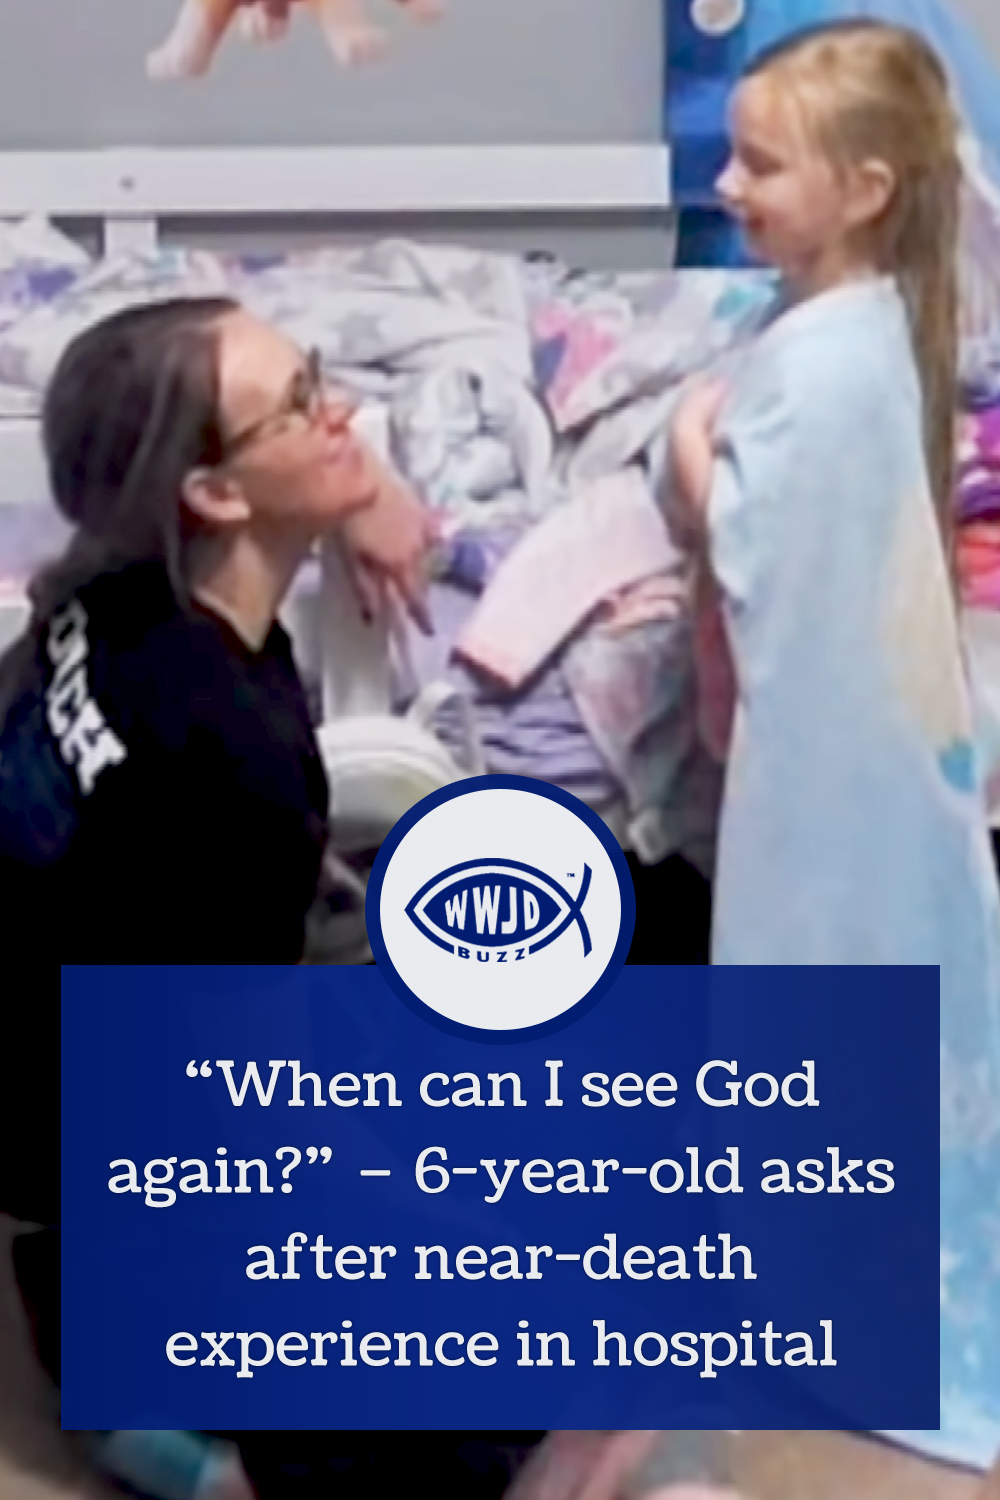 “When can I see God again?” – 6-year-old asks after near-death experience in hospital